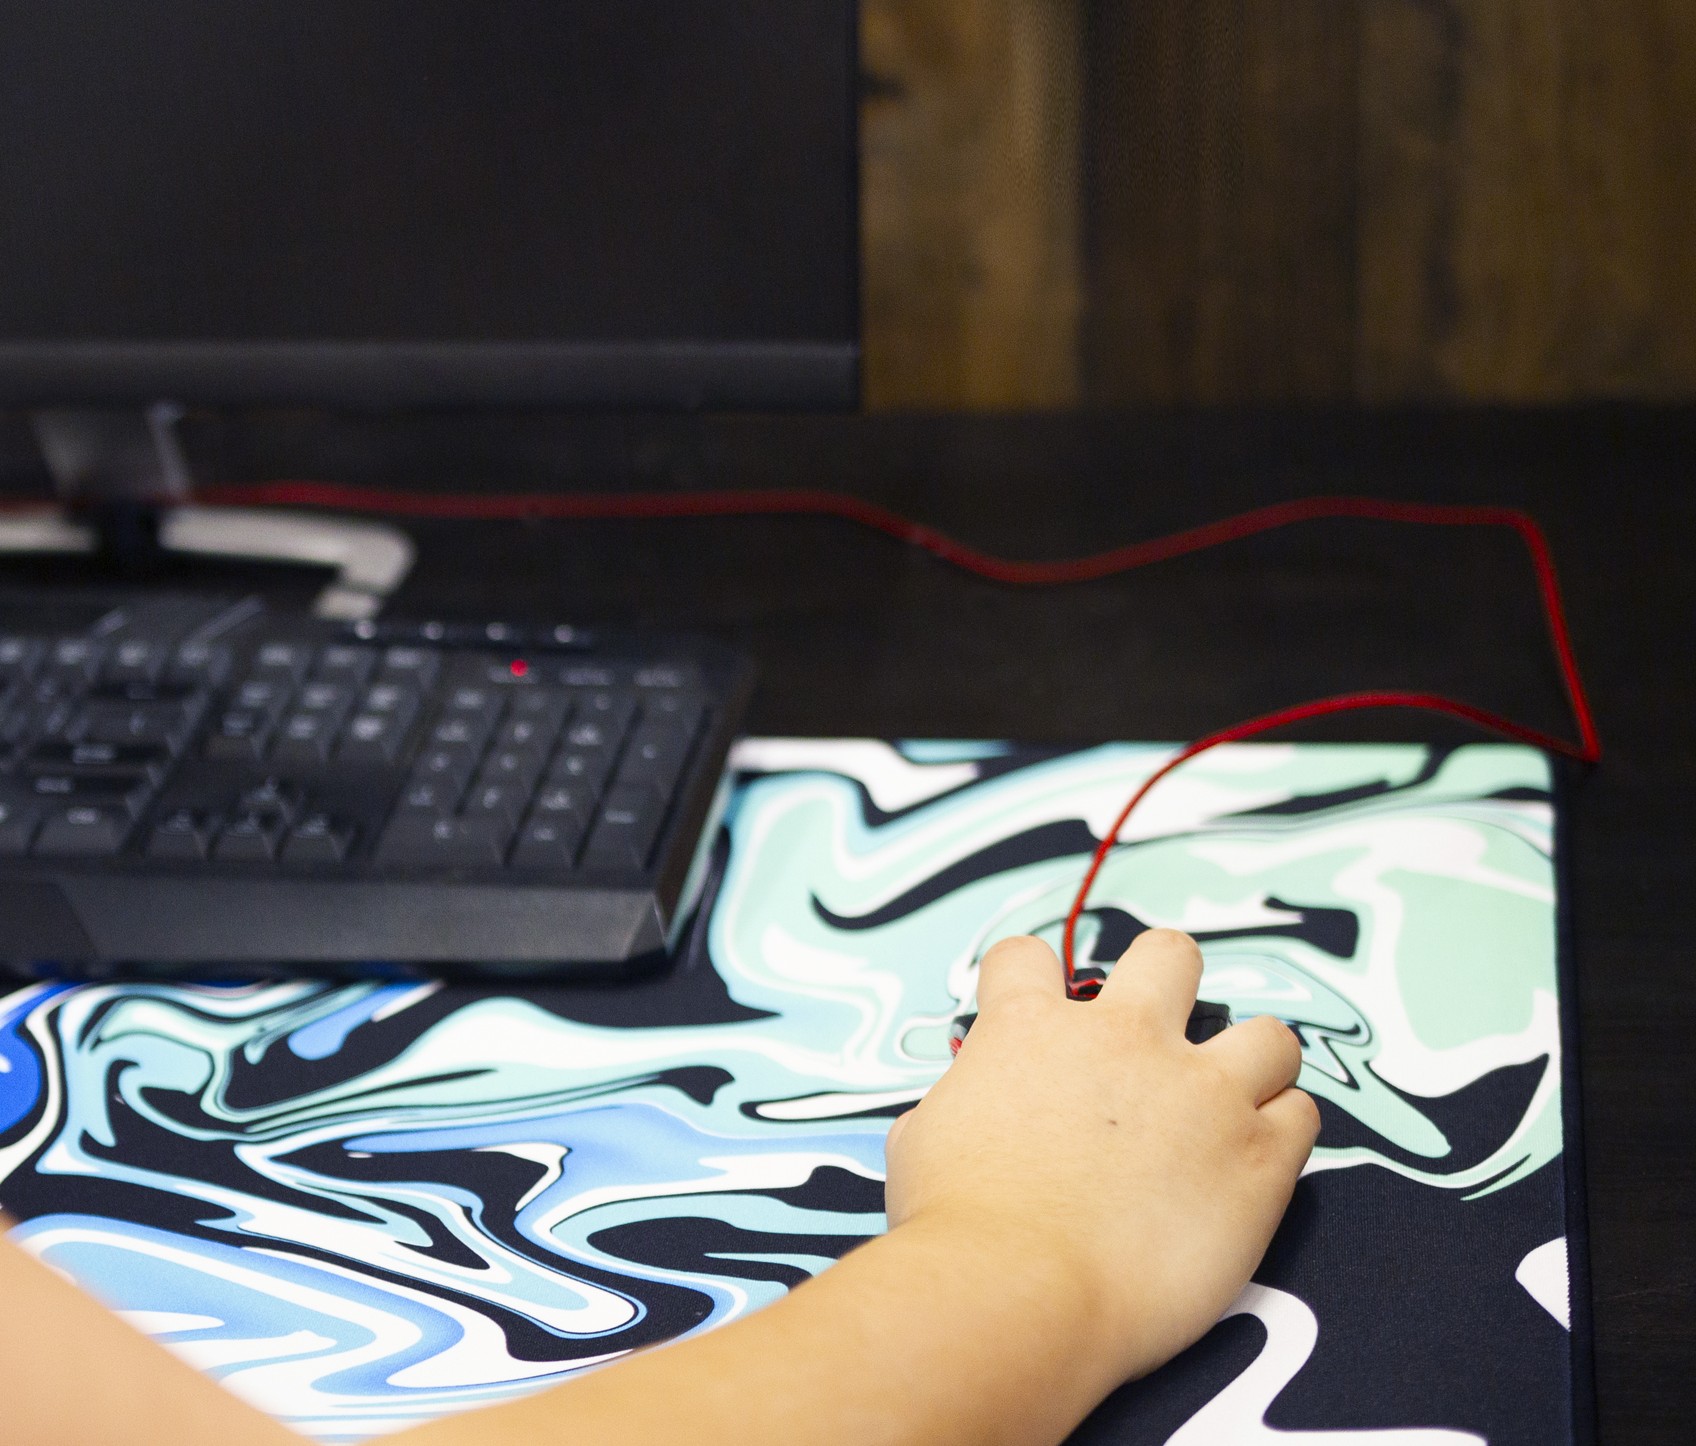 Layered Swirl Extended Mousepad – Inked Gaming